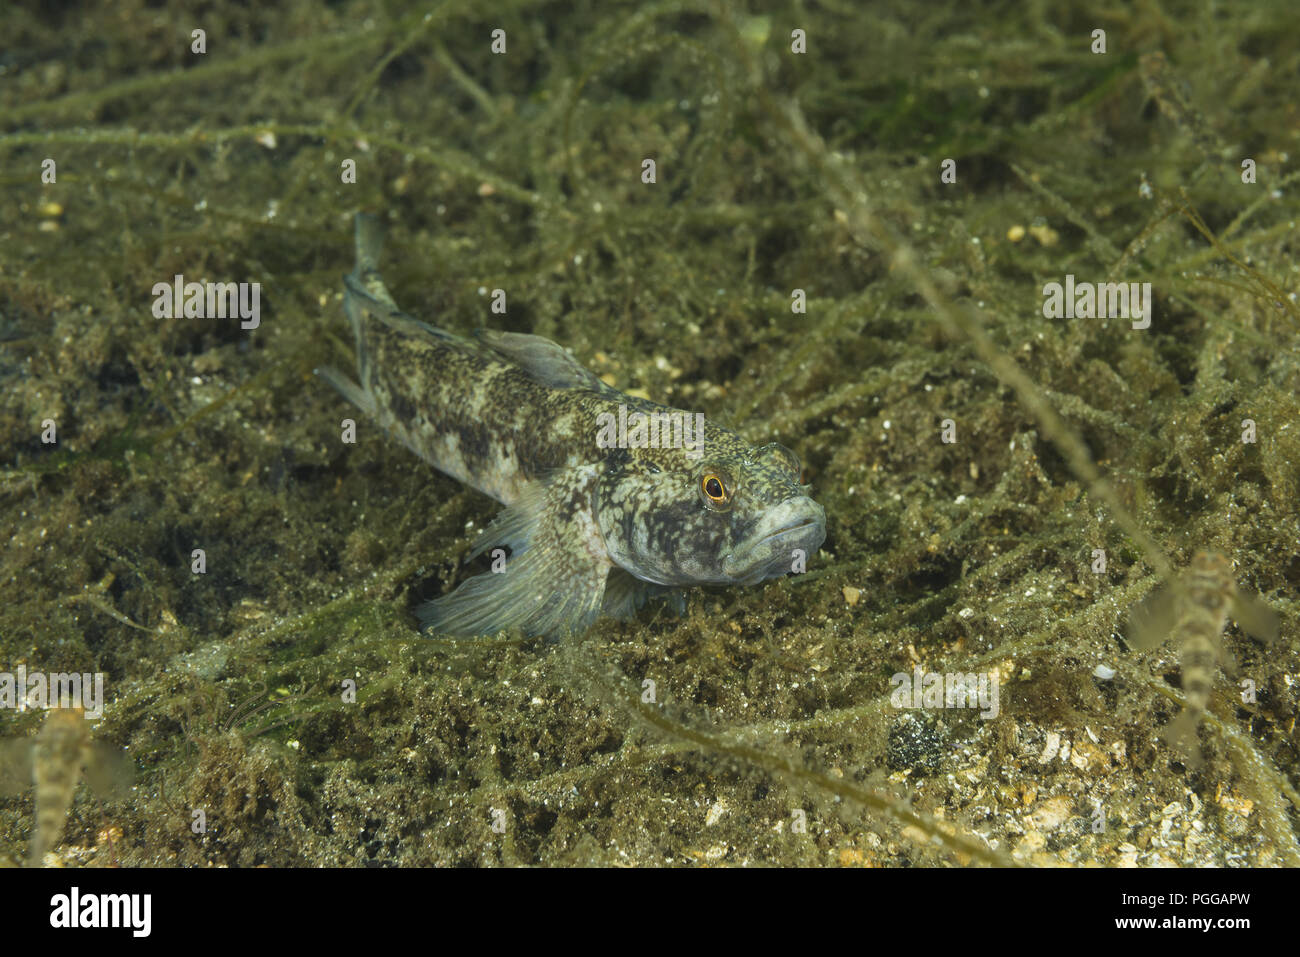 Shadow goby or Black Goby (Gobius niger) Stock Photo